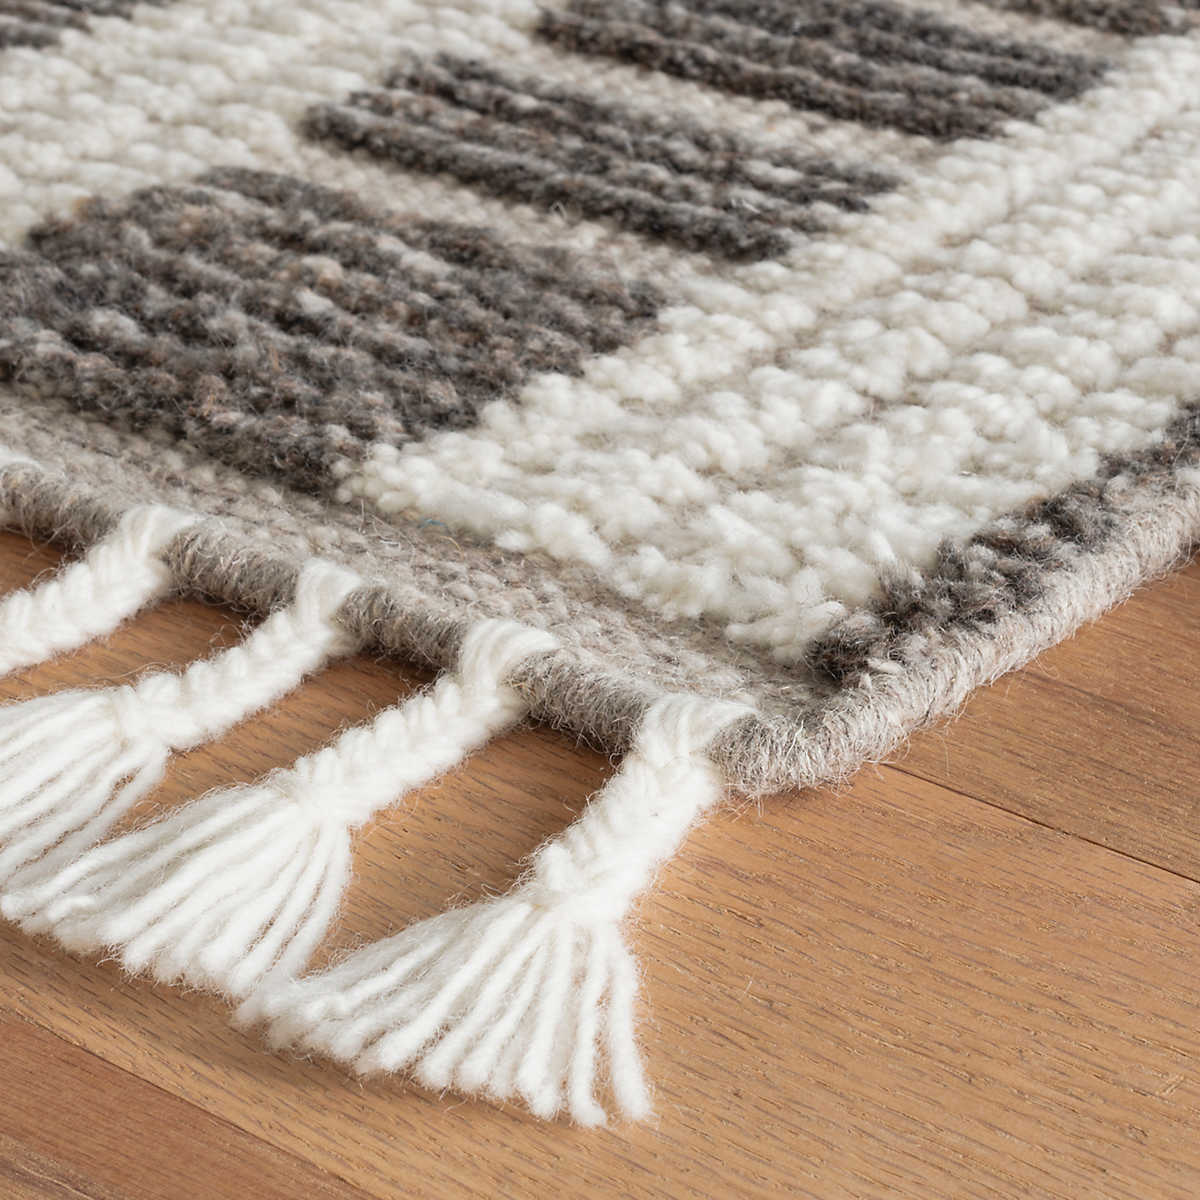 The Tory Grey/Ivory Rug stripes of Ivory fleece alternate with raised bands of naturally colored, mélange Charcoal wool. Interspersed by low-profile, woven taupe boundaries that bring rhythm to the textural blocks. Length sides are lightened with funky, bohemian braided tassels that add whimsy. Amethyst Home provides interior design services, furniture, rugs, and lighting in the Kansas City metro area.